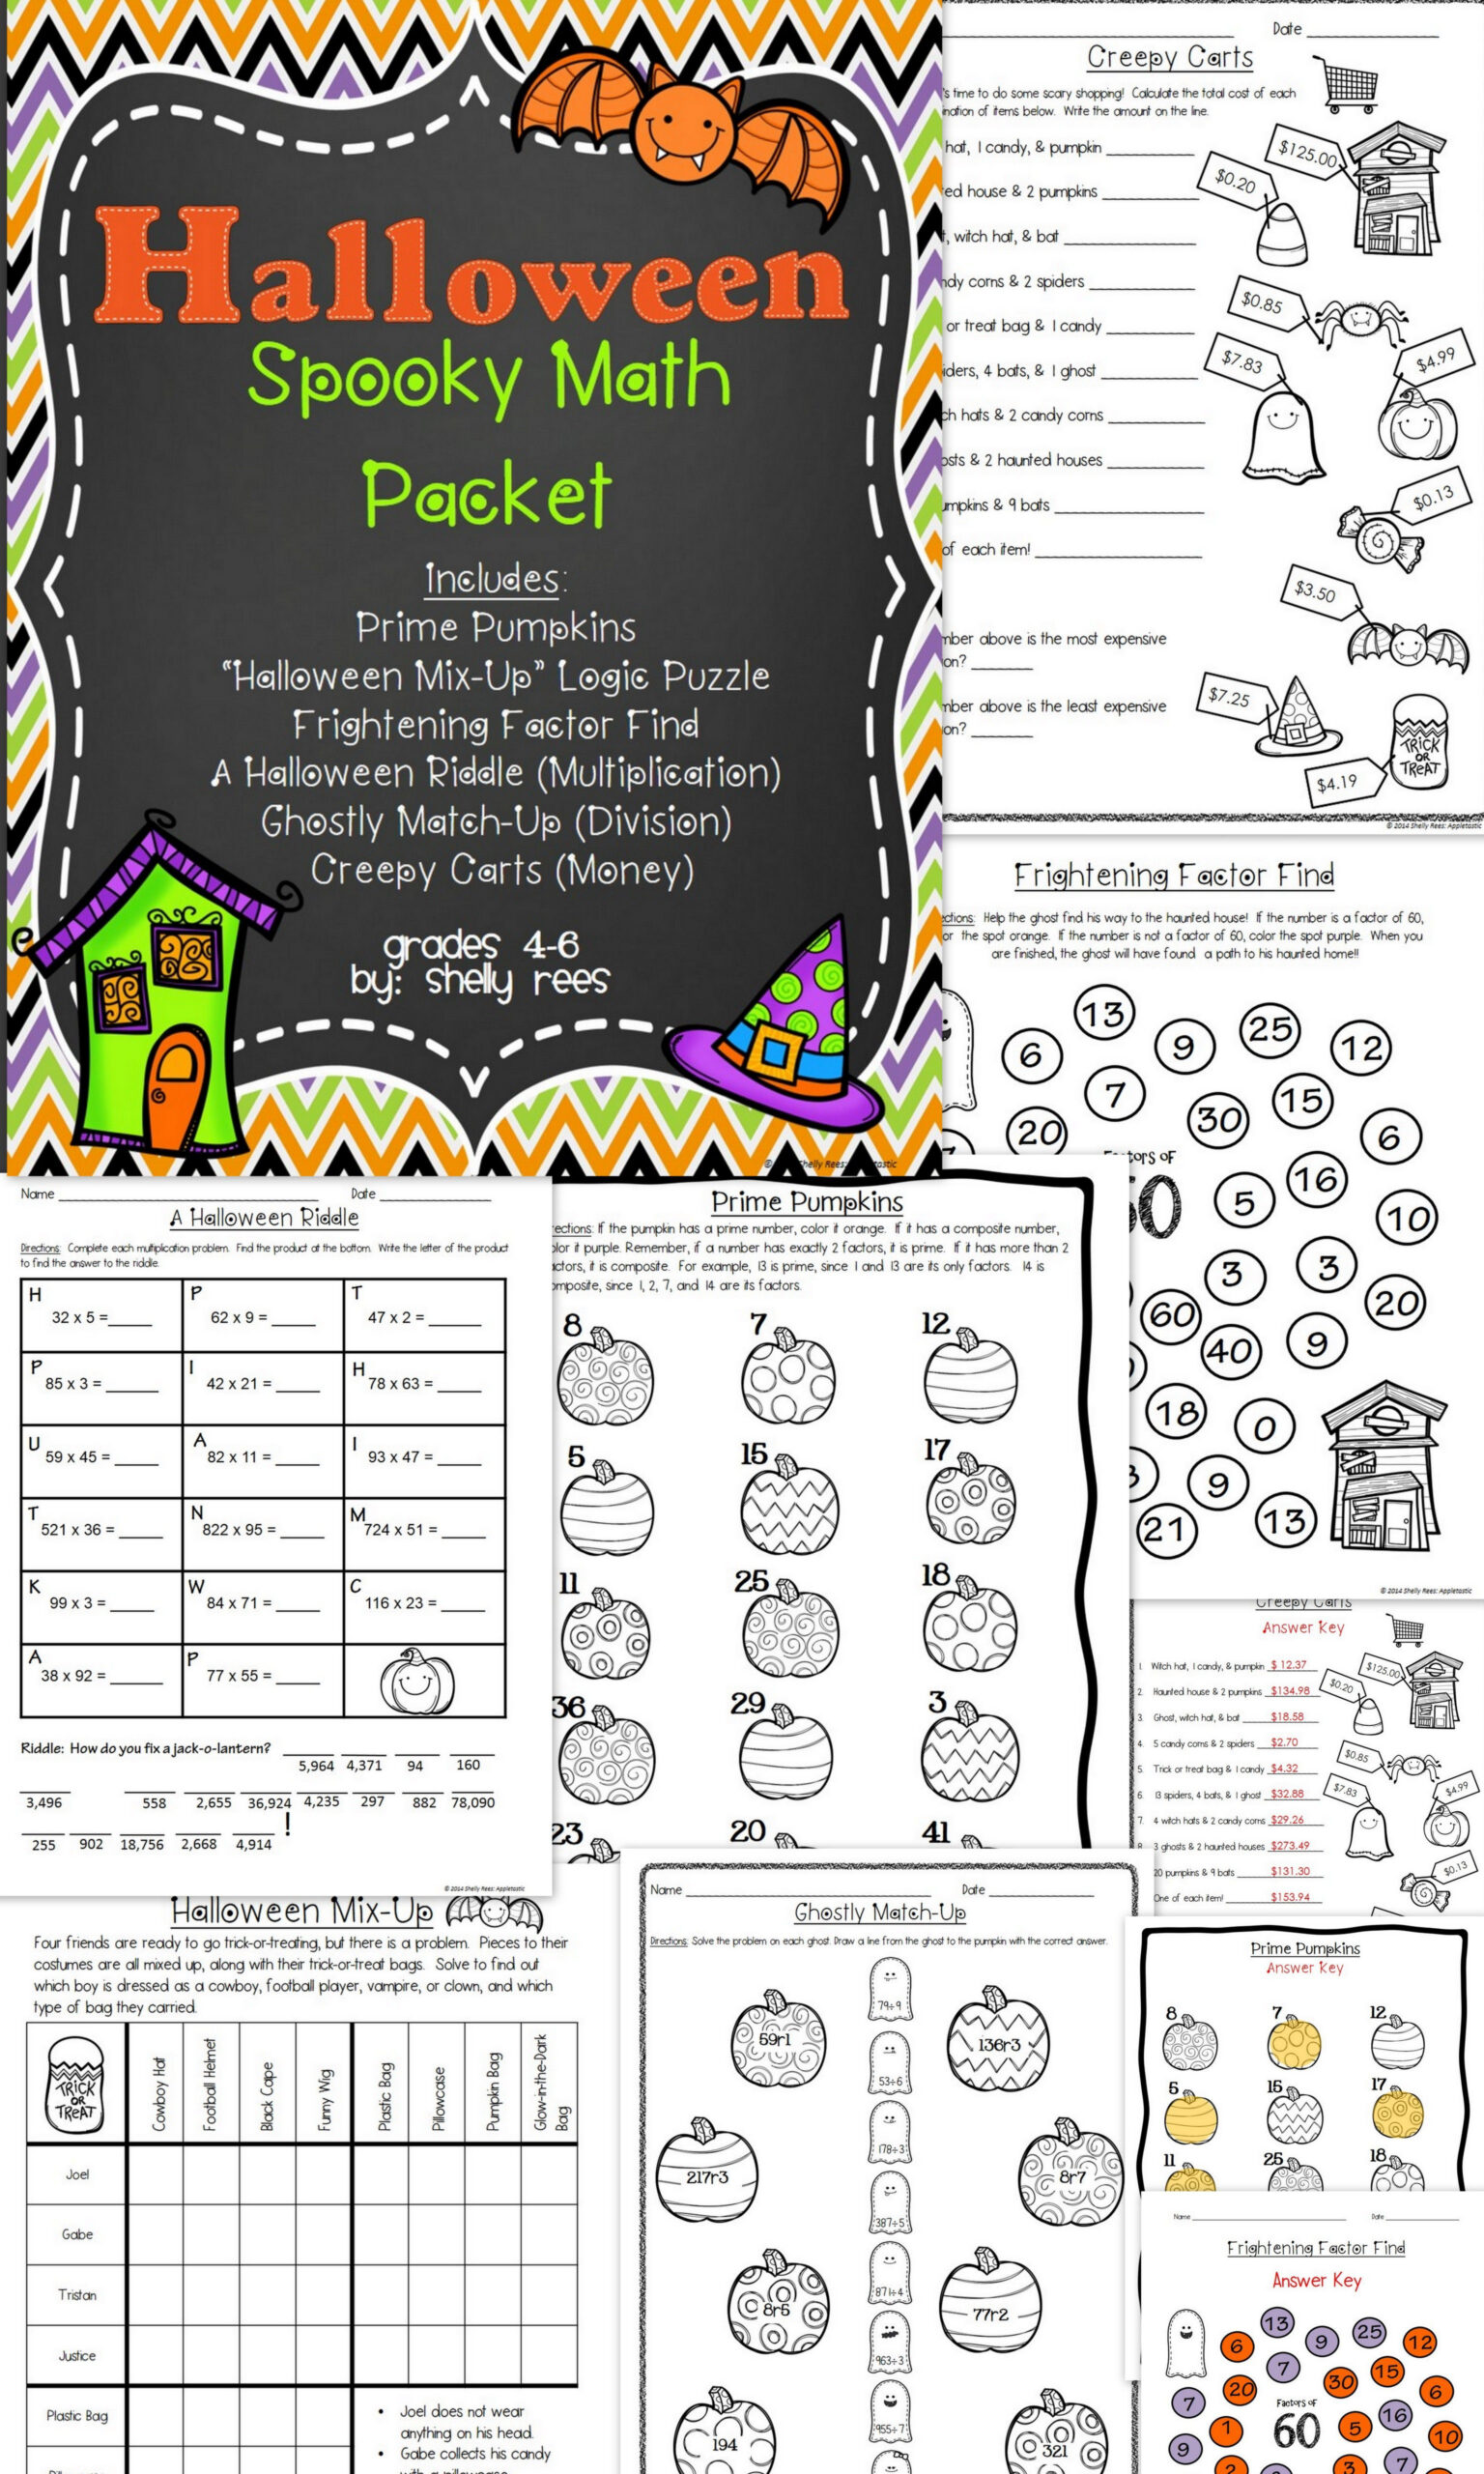 Halloween Math Packet For Grades 4-6! Fun Worksheets And